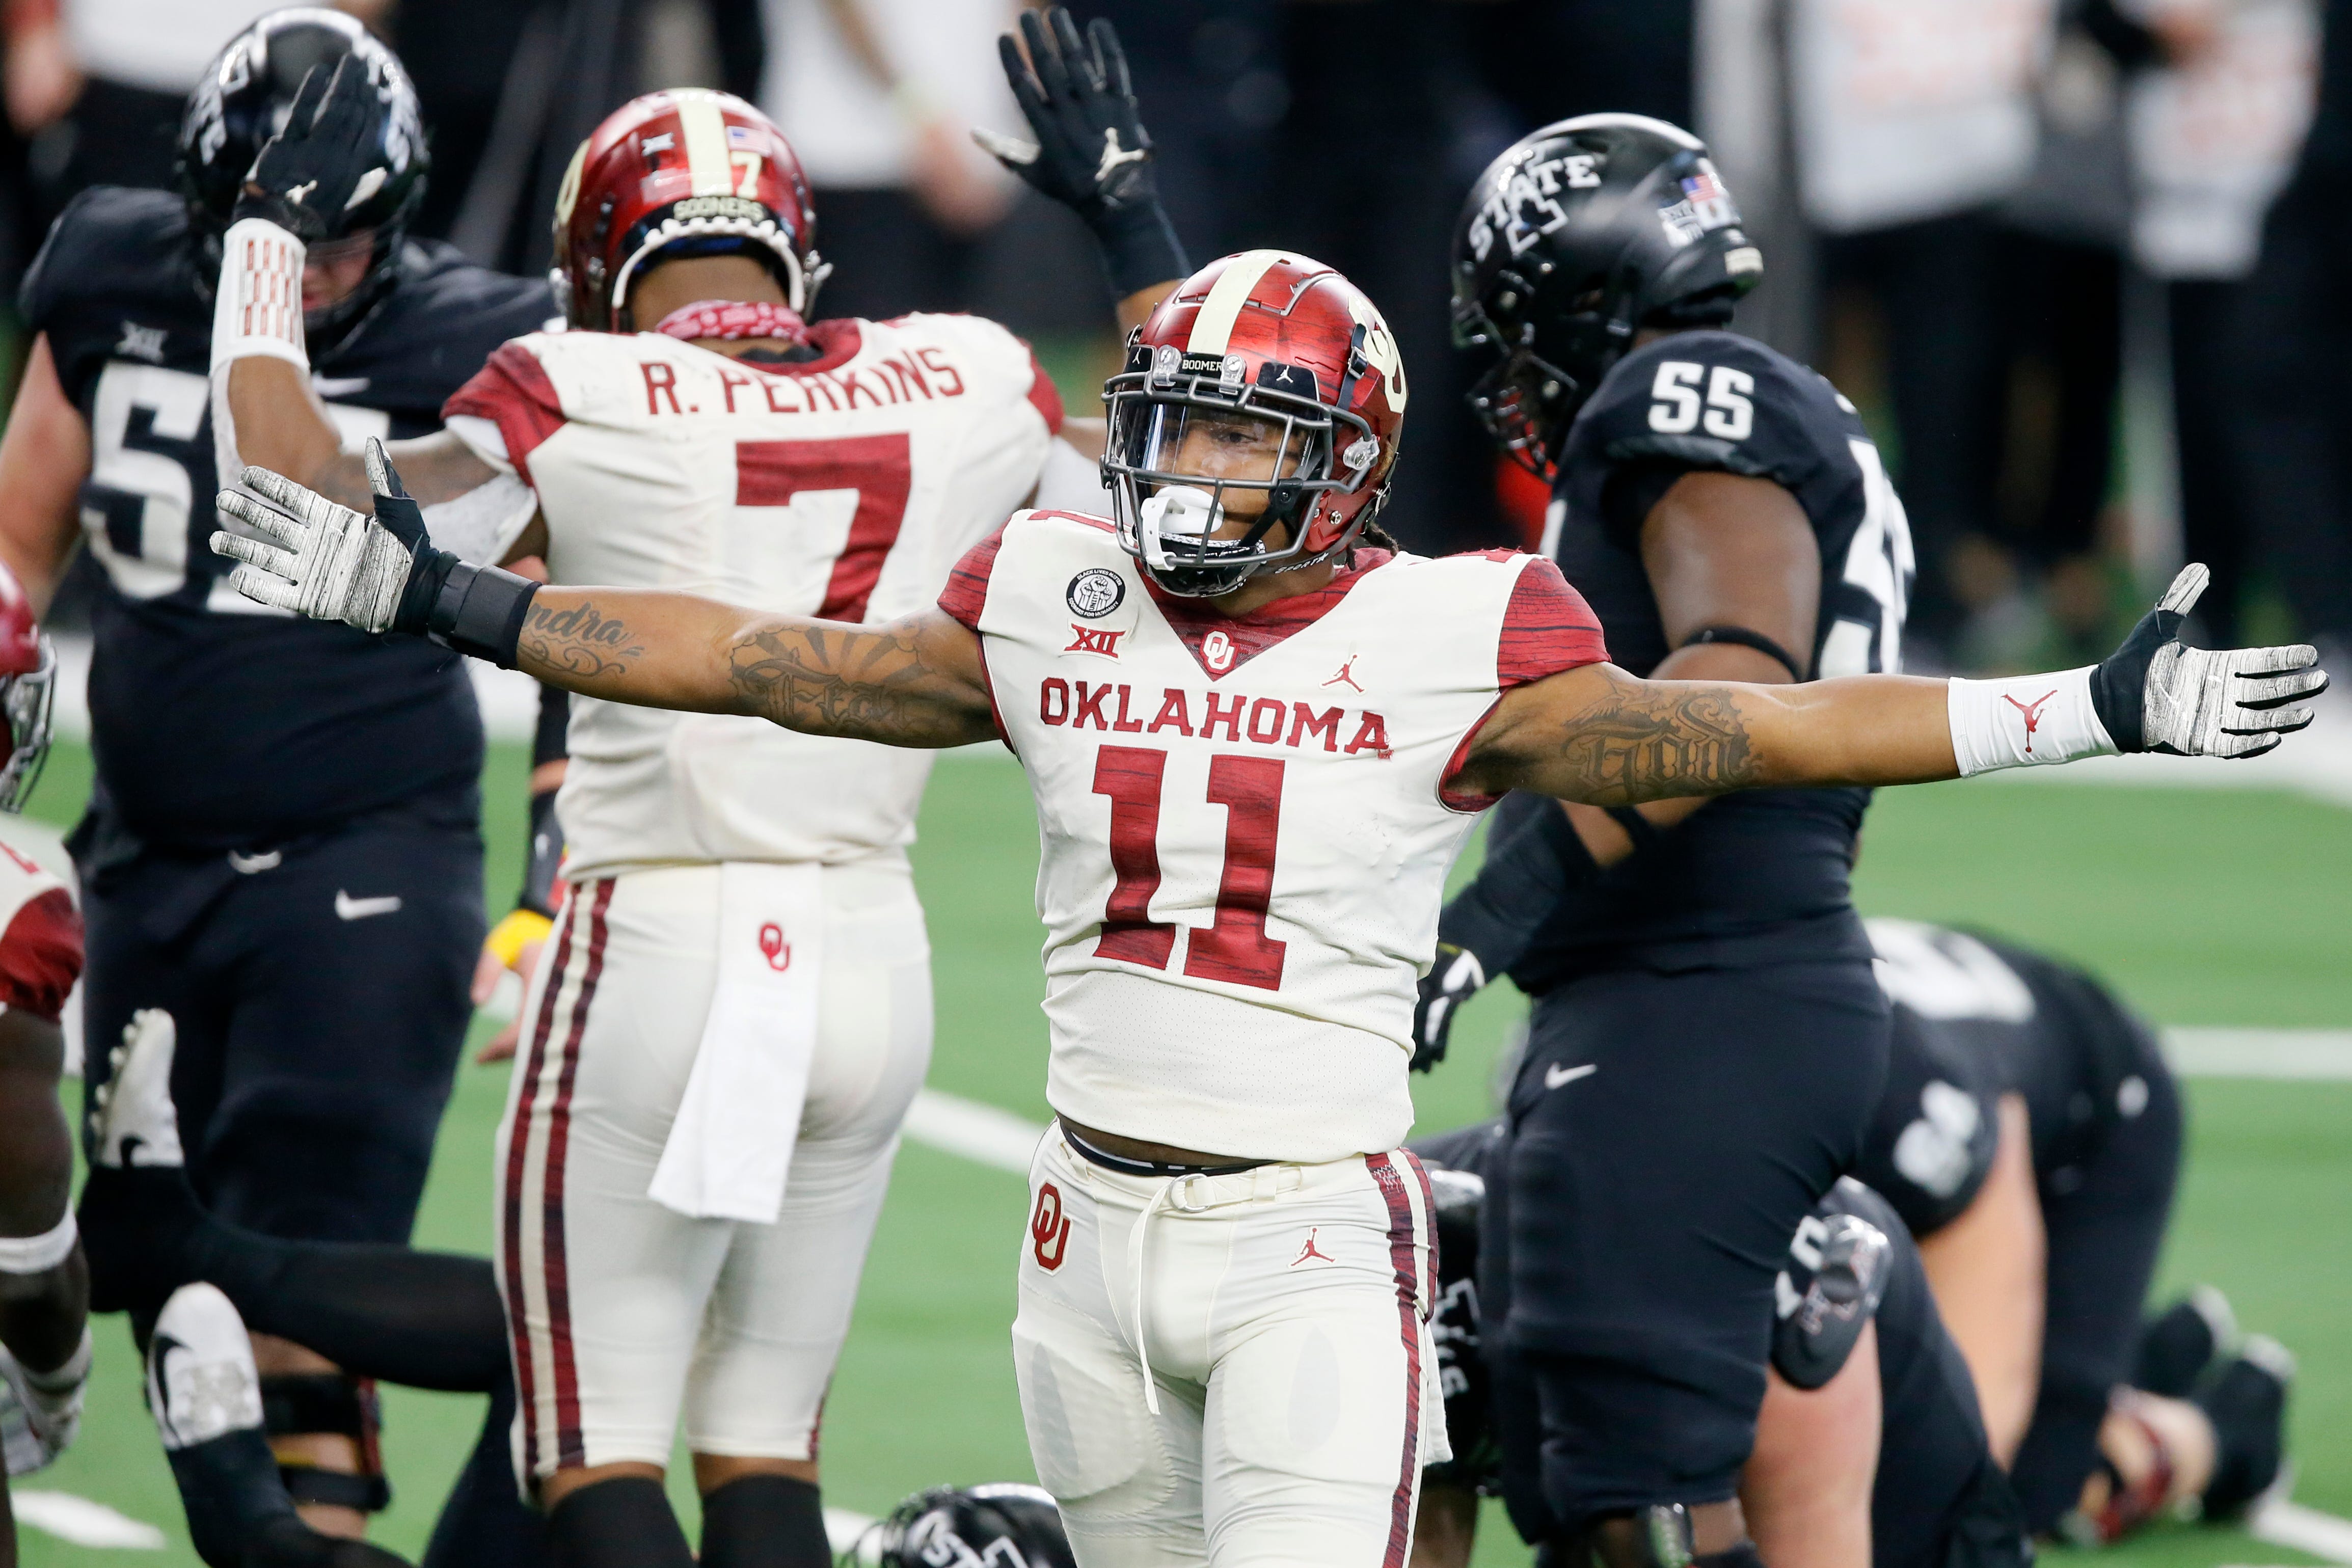 OU's Nik Bonitto (11) celebrates after a sack during the Big 12 Championship Game against Iowa State last Dec. 19 at AT&T Stadium in Arlington, Texas.